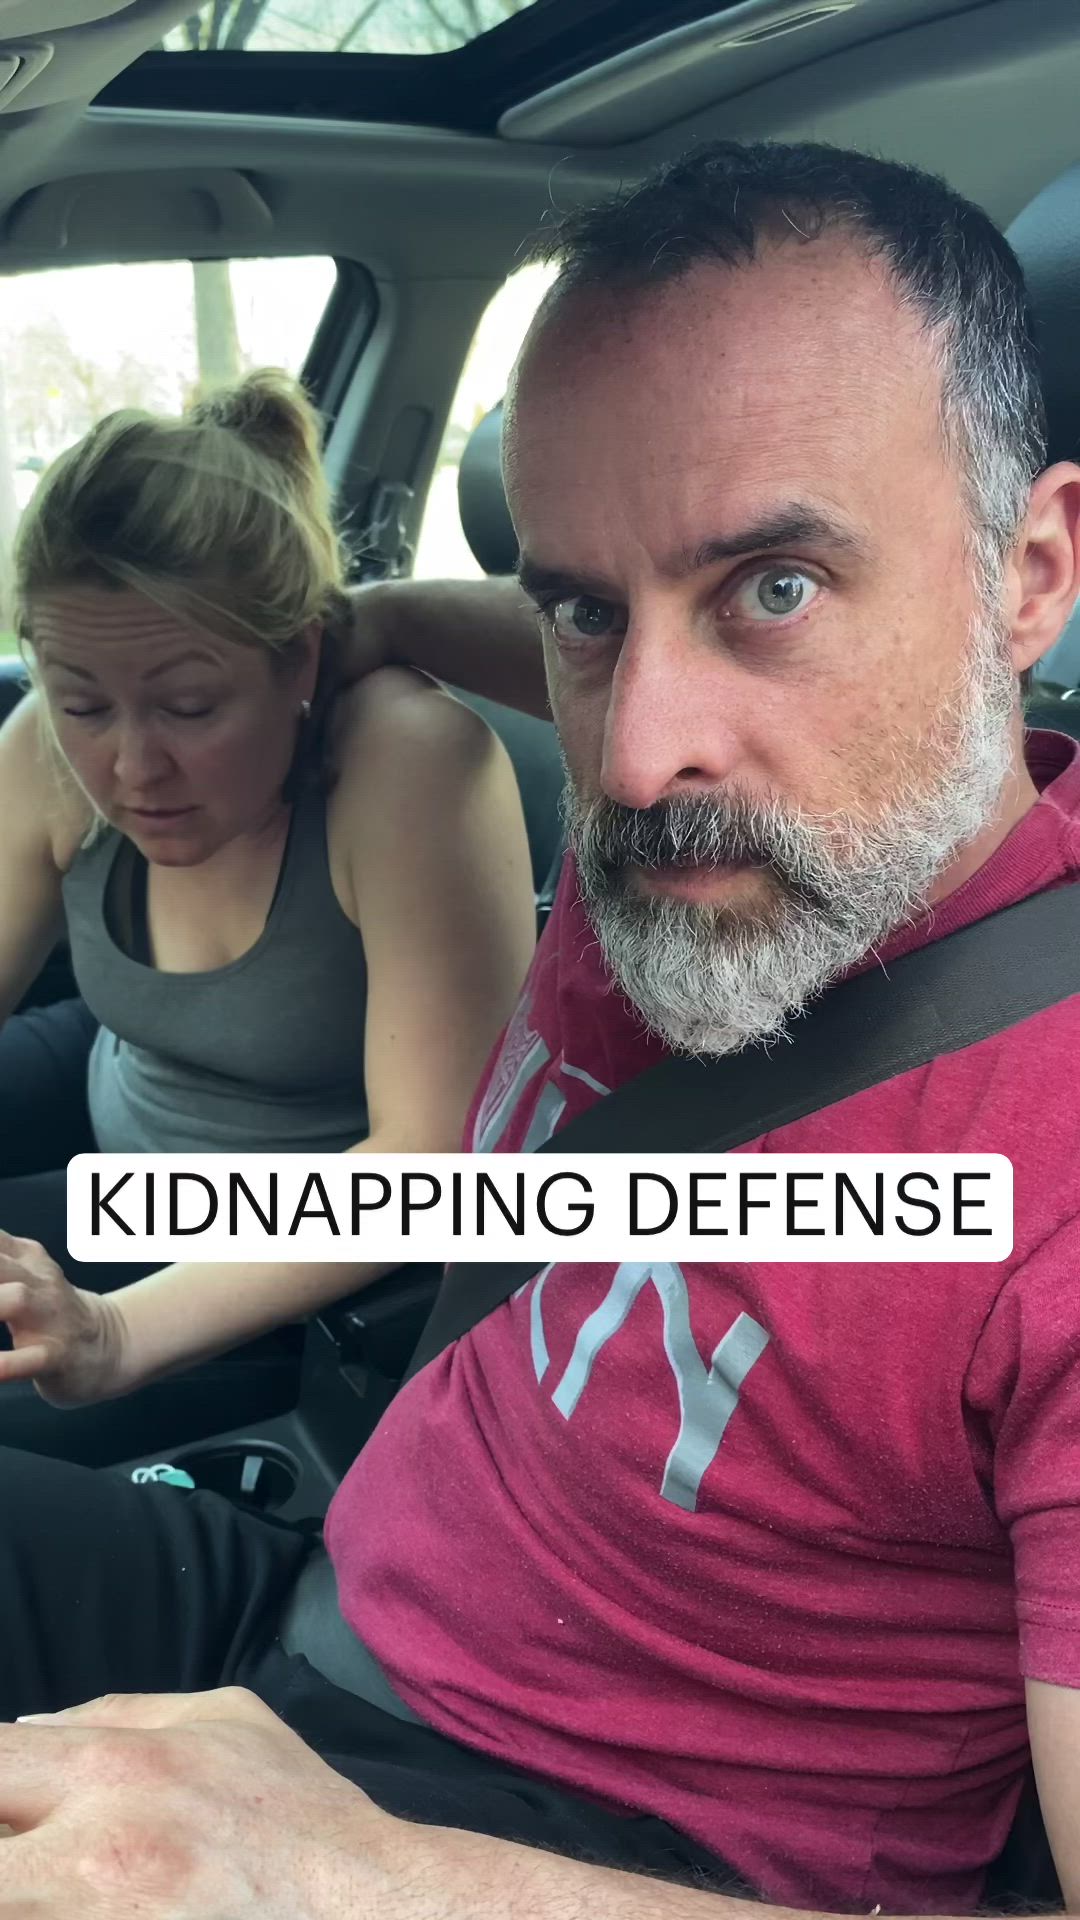 This contains an image of: KIDNAPPING DEFENSE